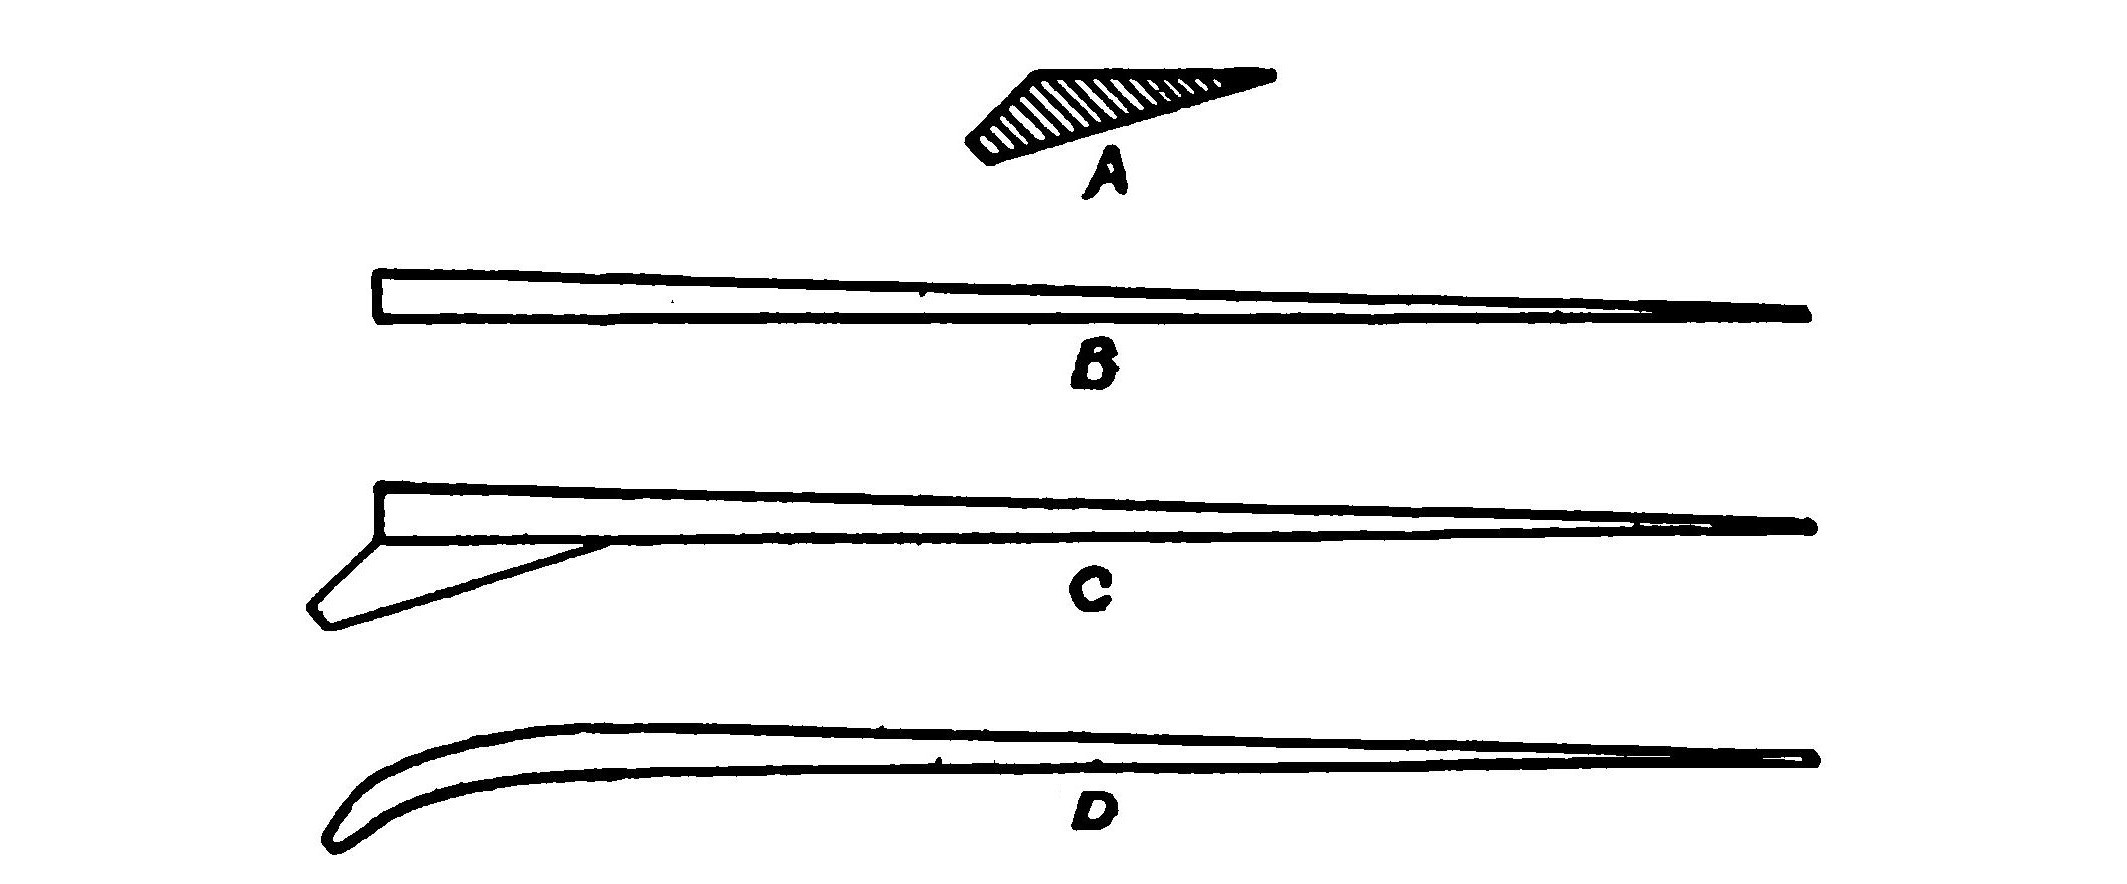 FIG. 16. A good method of building a wooden plane.